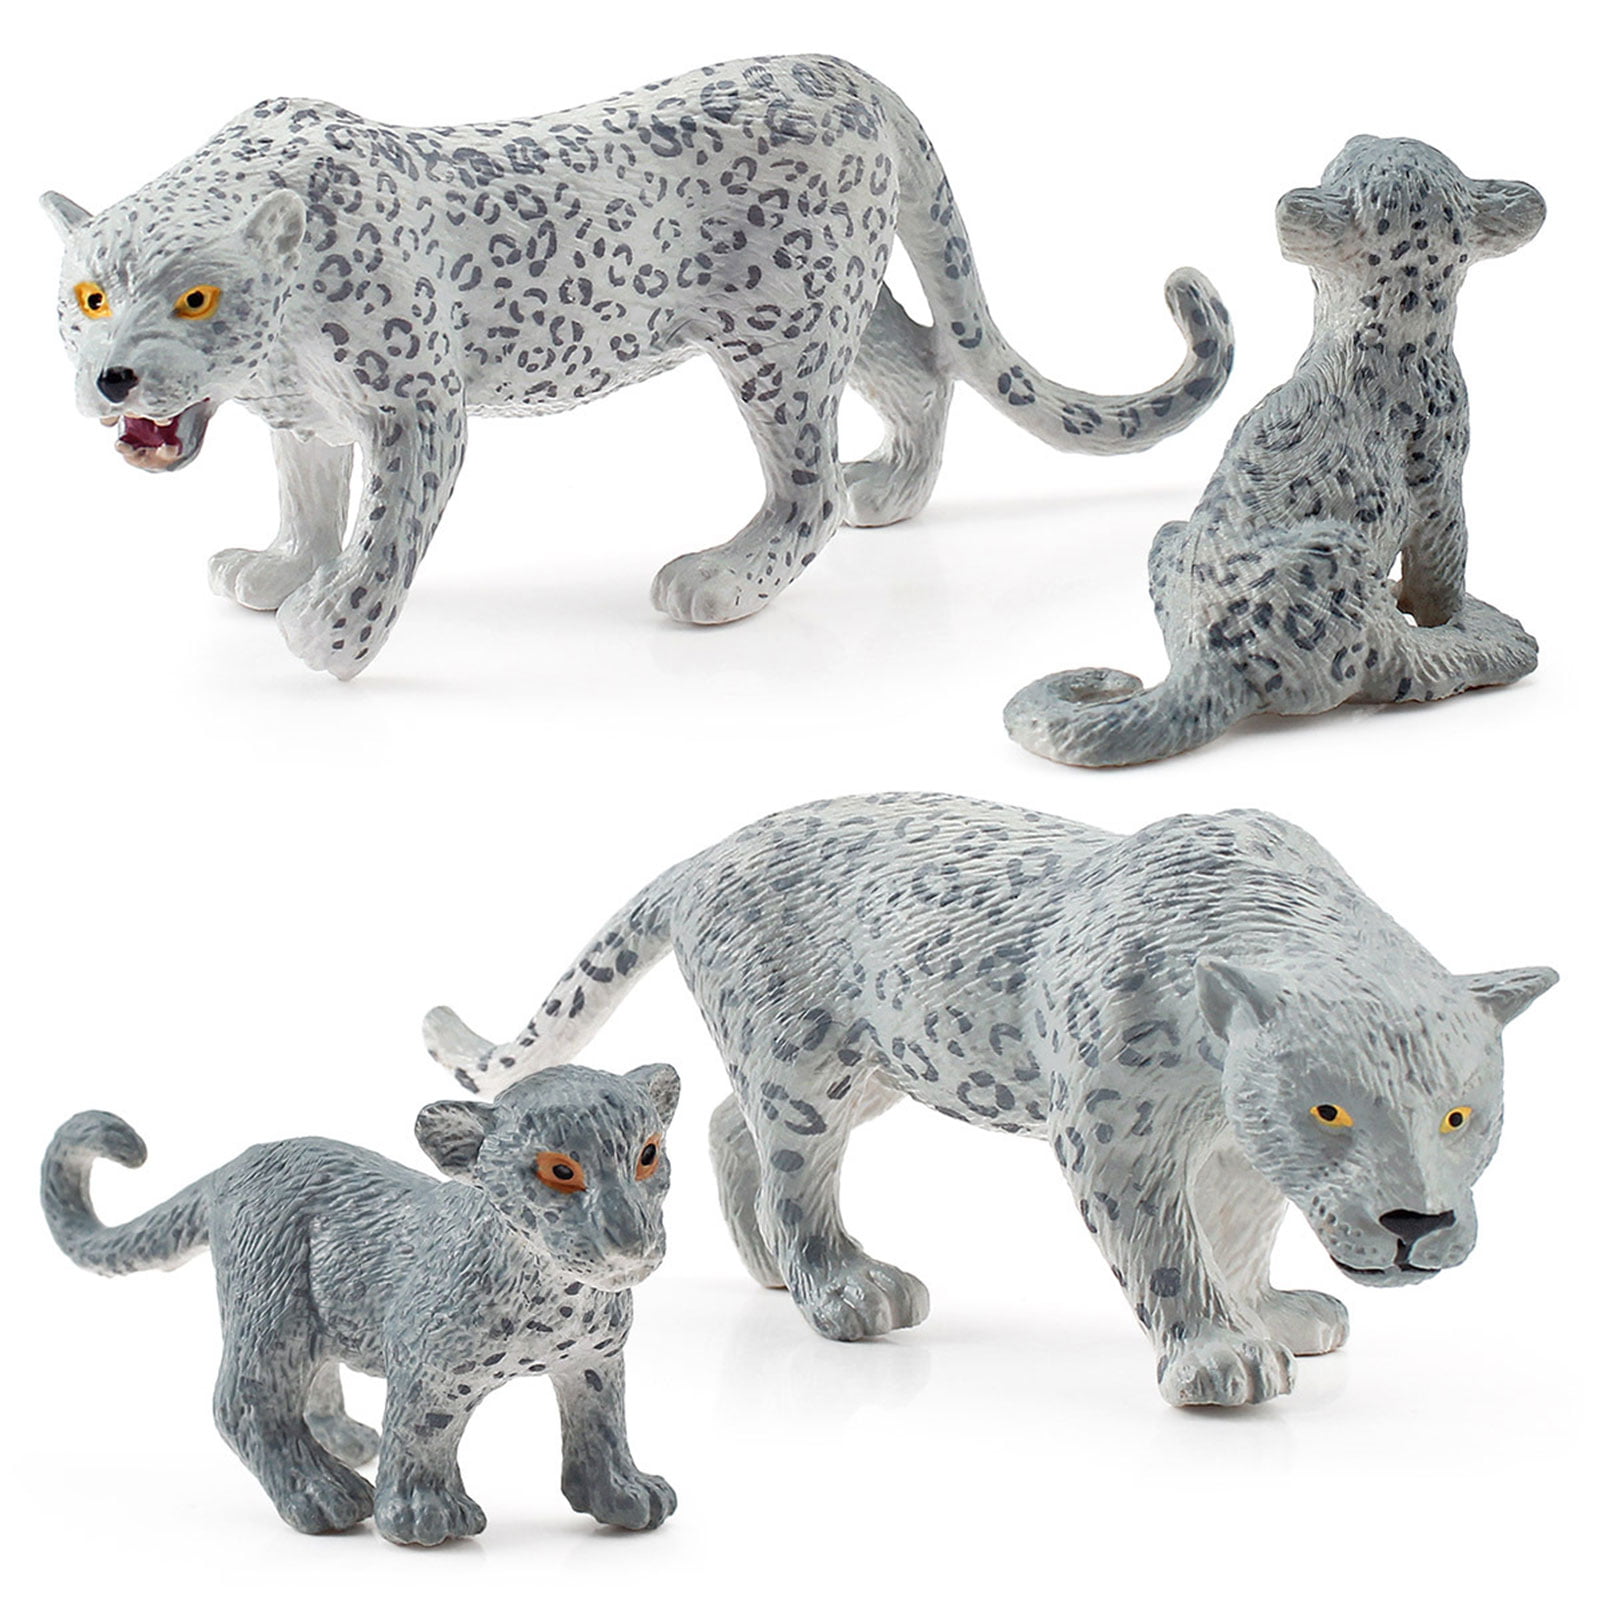 Realistic Leopard Toys Educational Animal Model Figure Toy for Kids C 